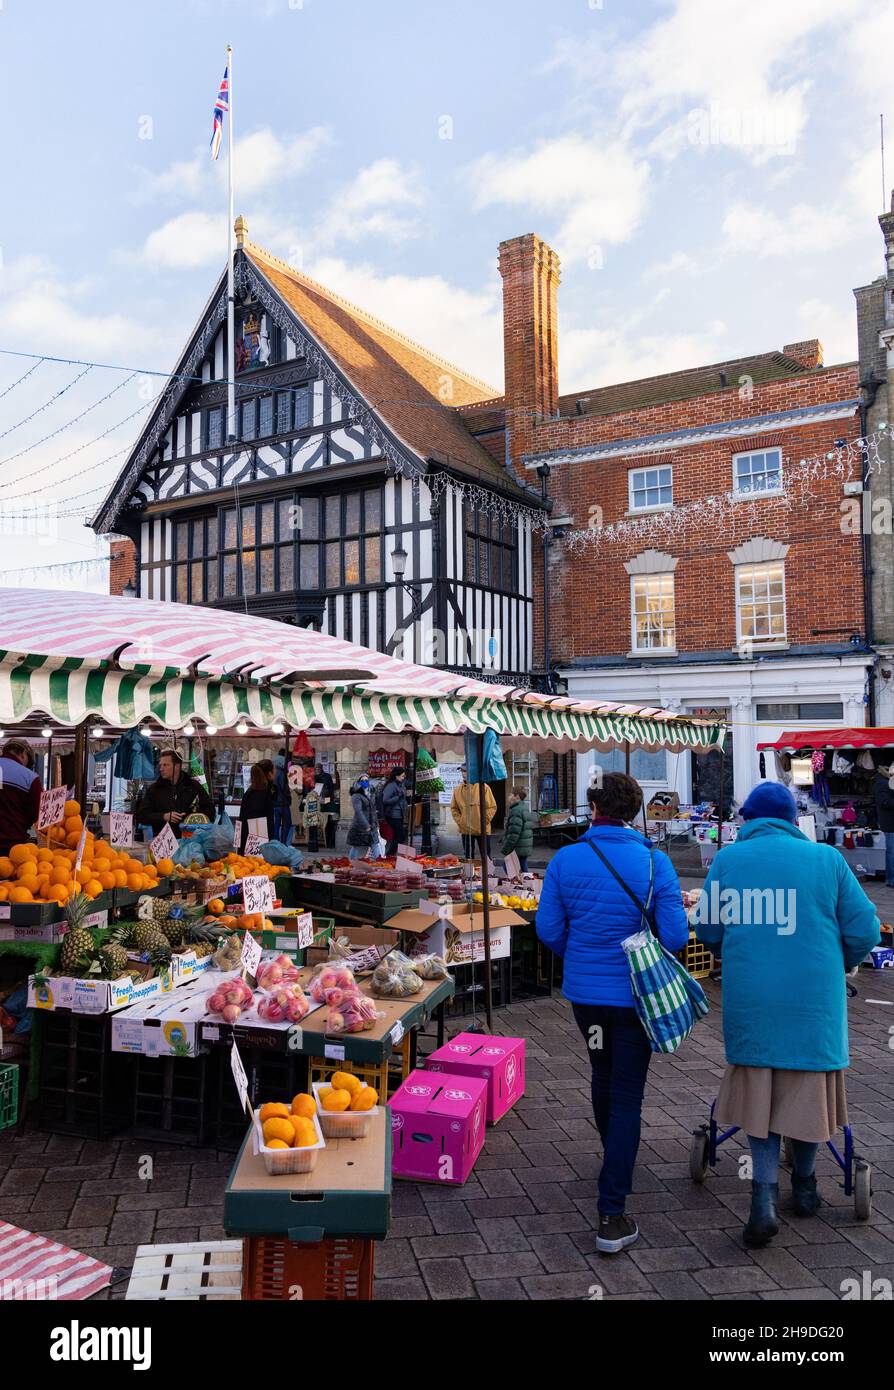 Traditional English market town; People shopping at the market stalls in Saffron Walden Market square, the town centre, Saffron Walden, Essex UK Stock Photo